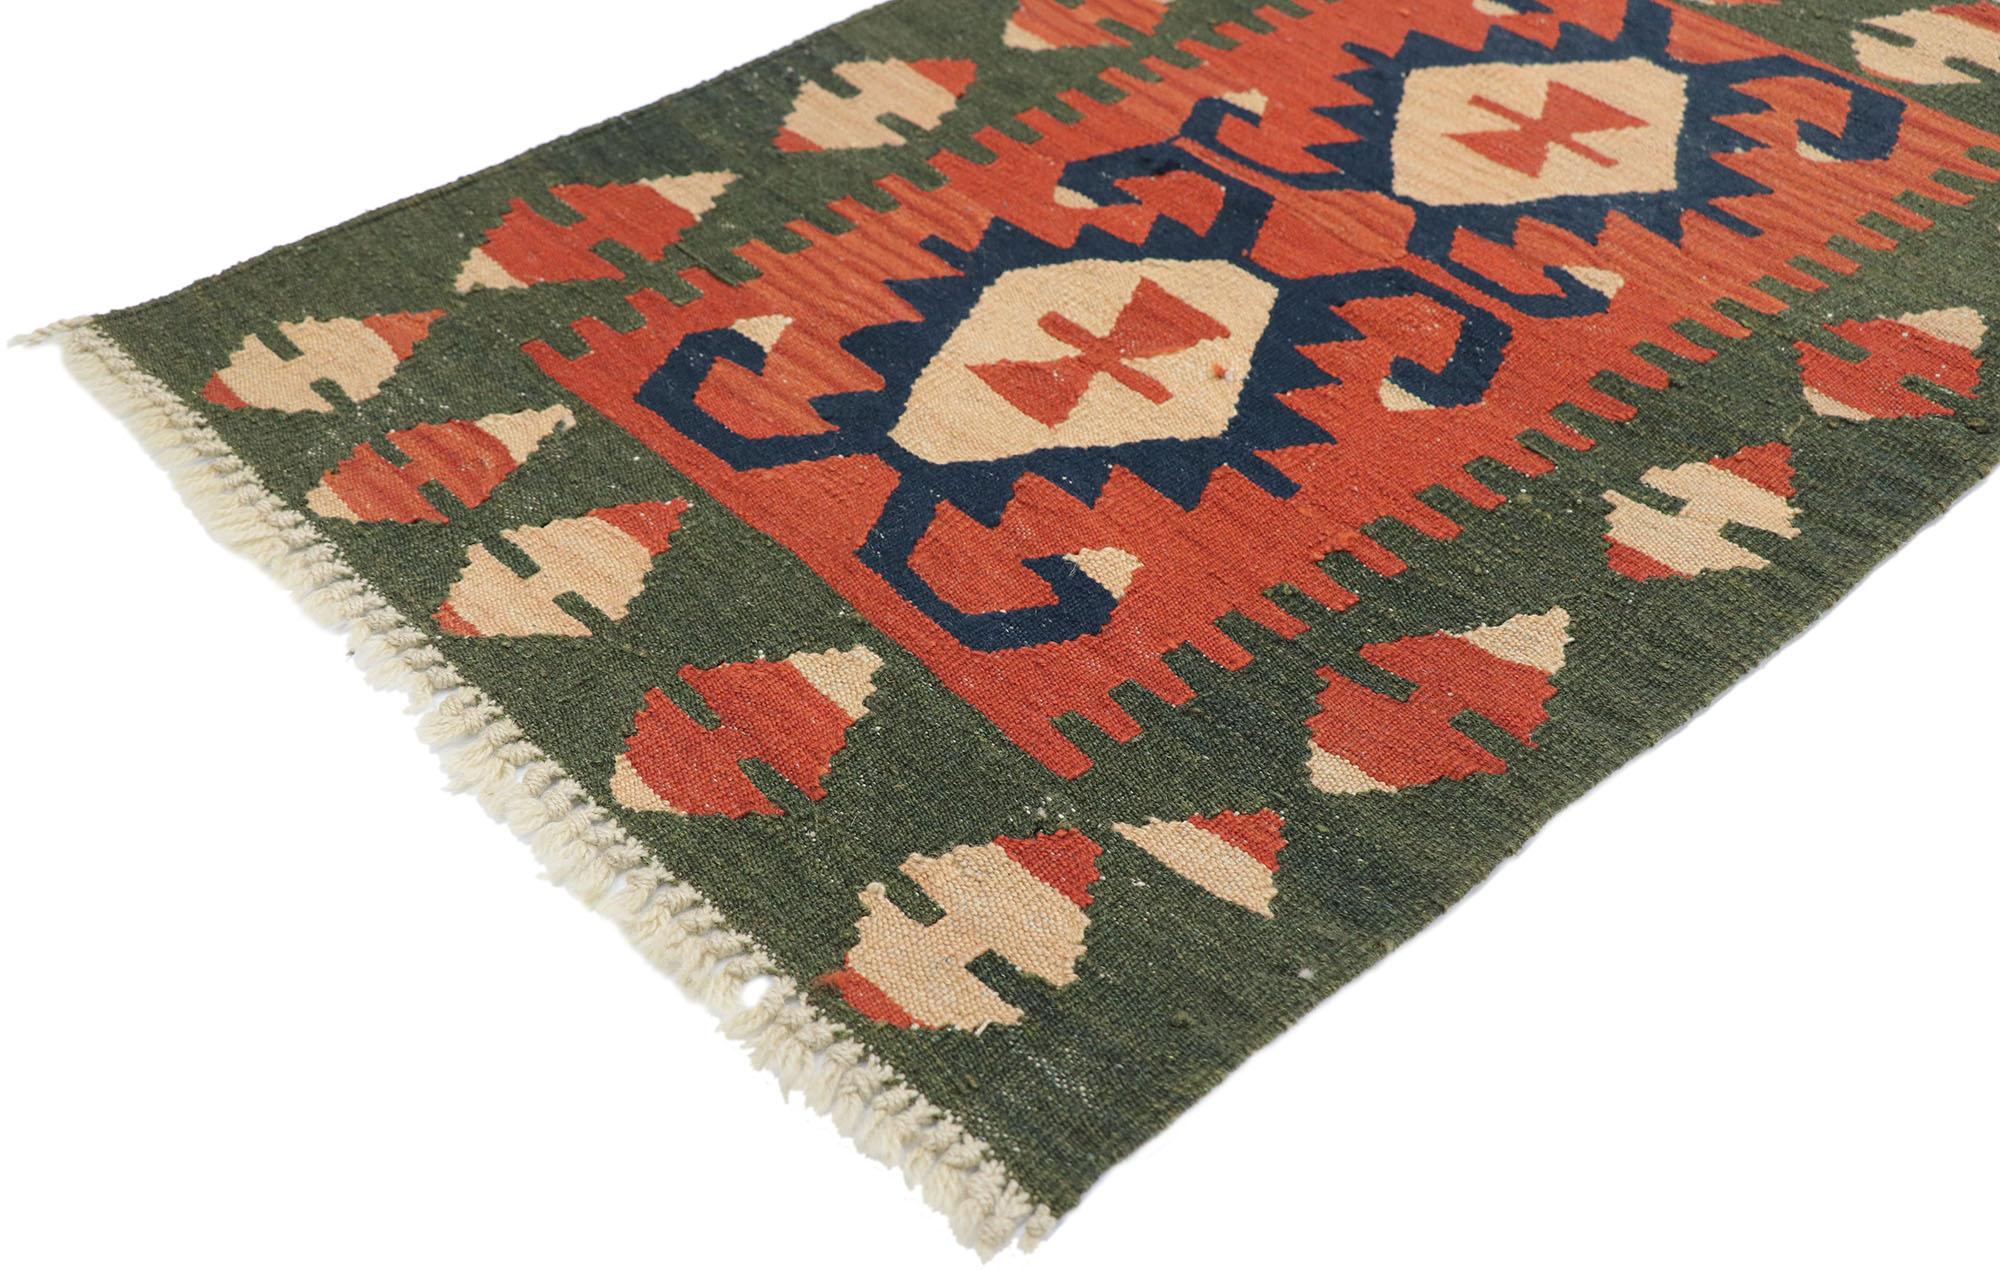 77889 Vintage Persian Shiraz Kilim rug with Modern Tribal style 02'00 x 02'11. Full of tiny details and a bold expressive design combined with vibrant colors and tribal style, this hand-woven wool vintage Persian Shiraz kilim rug is a captivating